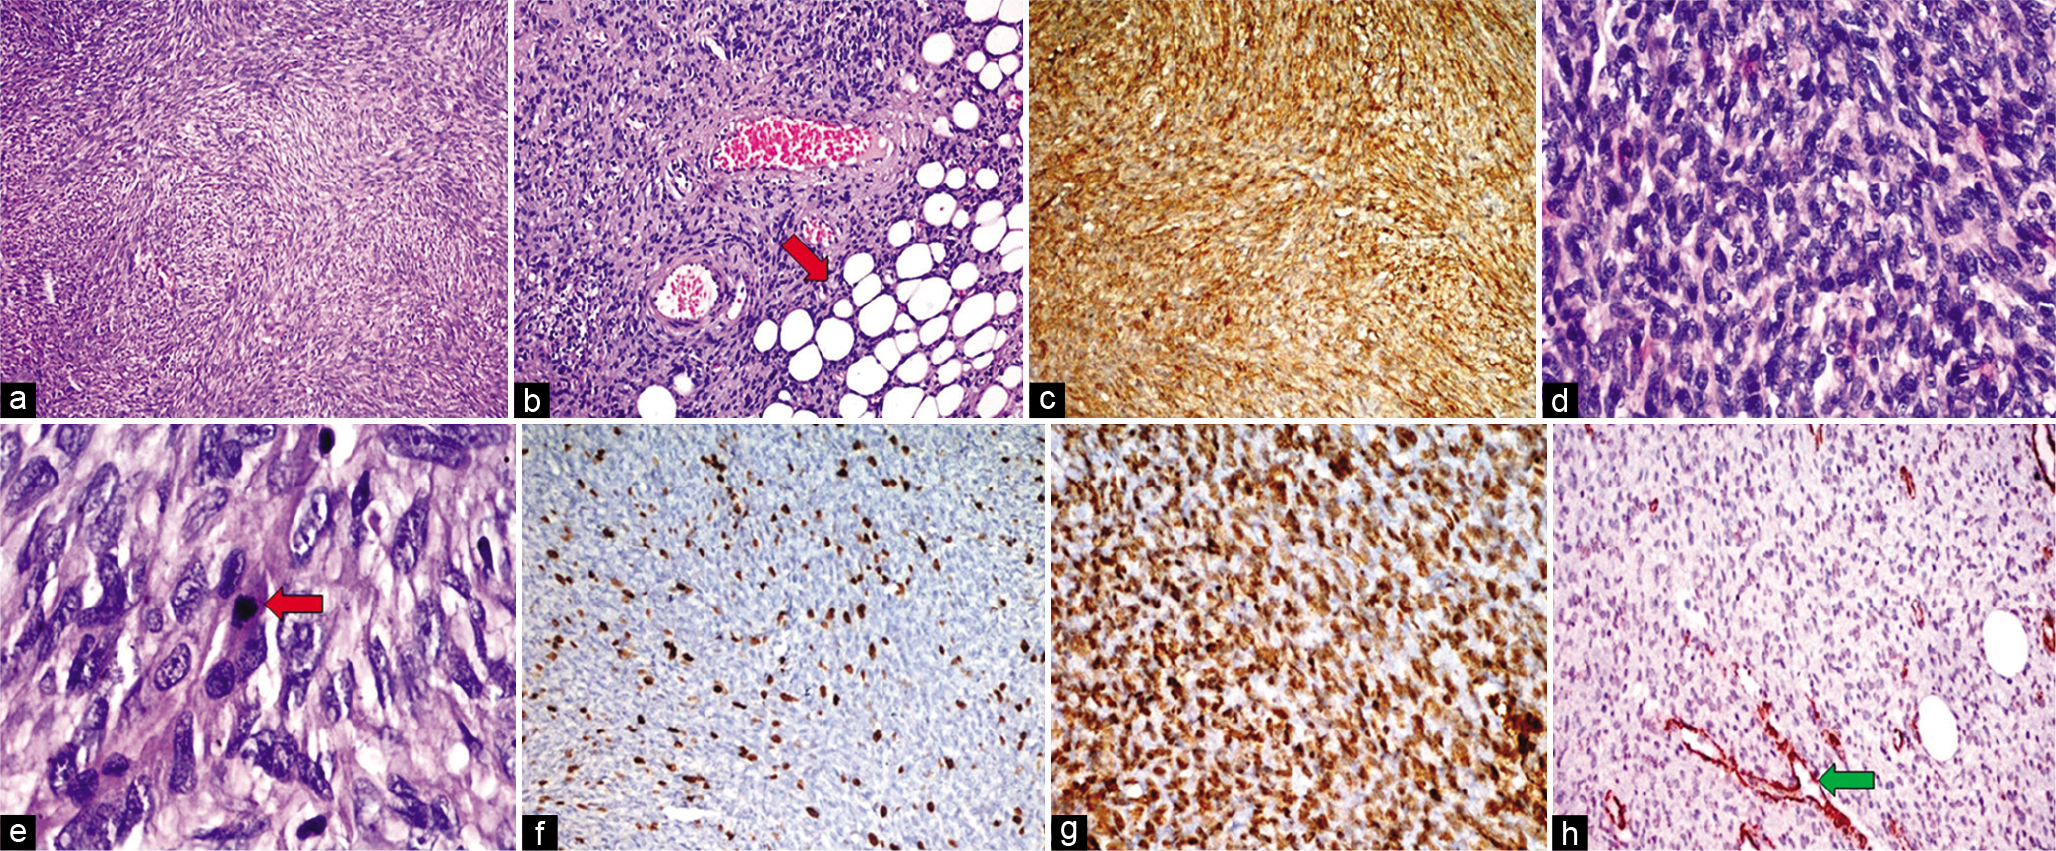 HPE from lesion in the upper back of Case 1. Hematoxylin and eosin (H&E) stained sections demonstrate a proliferation of spindle-shaped cells with elongated nuclei and mild pleomorphism, arranged in a storiform to the whorled pattern (a ×100). This lesion infiltrates the underlying subcutaneous fat (red arrow), producing a honeycomb-like design (b ×200). Immunohistochemistry (IHC) shows strong and diffuse positivity for CD34 indicating spindle cell proliferation (c). The areas of the sarcomatous component showed marked nuclear pleomorphism (H&E; d ×400), and higher magnification showed hyperchromatic nuclei with atypical mitosis (red arrow) (H&E; e ×1000). The index of ki-67 proliferative activity was approximately 10–12% positive (f). IHC in sarcomatous areas showed diffuse immunopositivity for smooth muscle actin (SMA) (g) and were immunonegative for CD34 (h) (positive control blood vessels – green arrow).